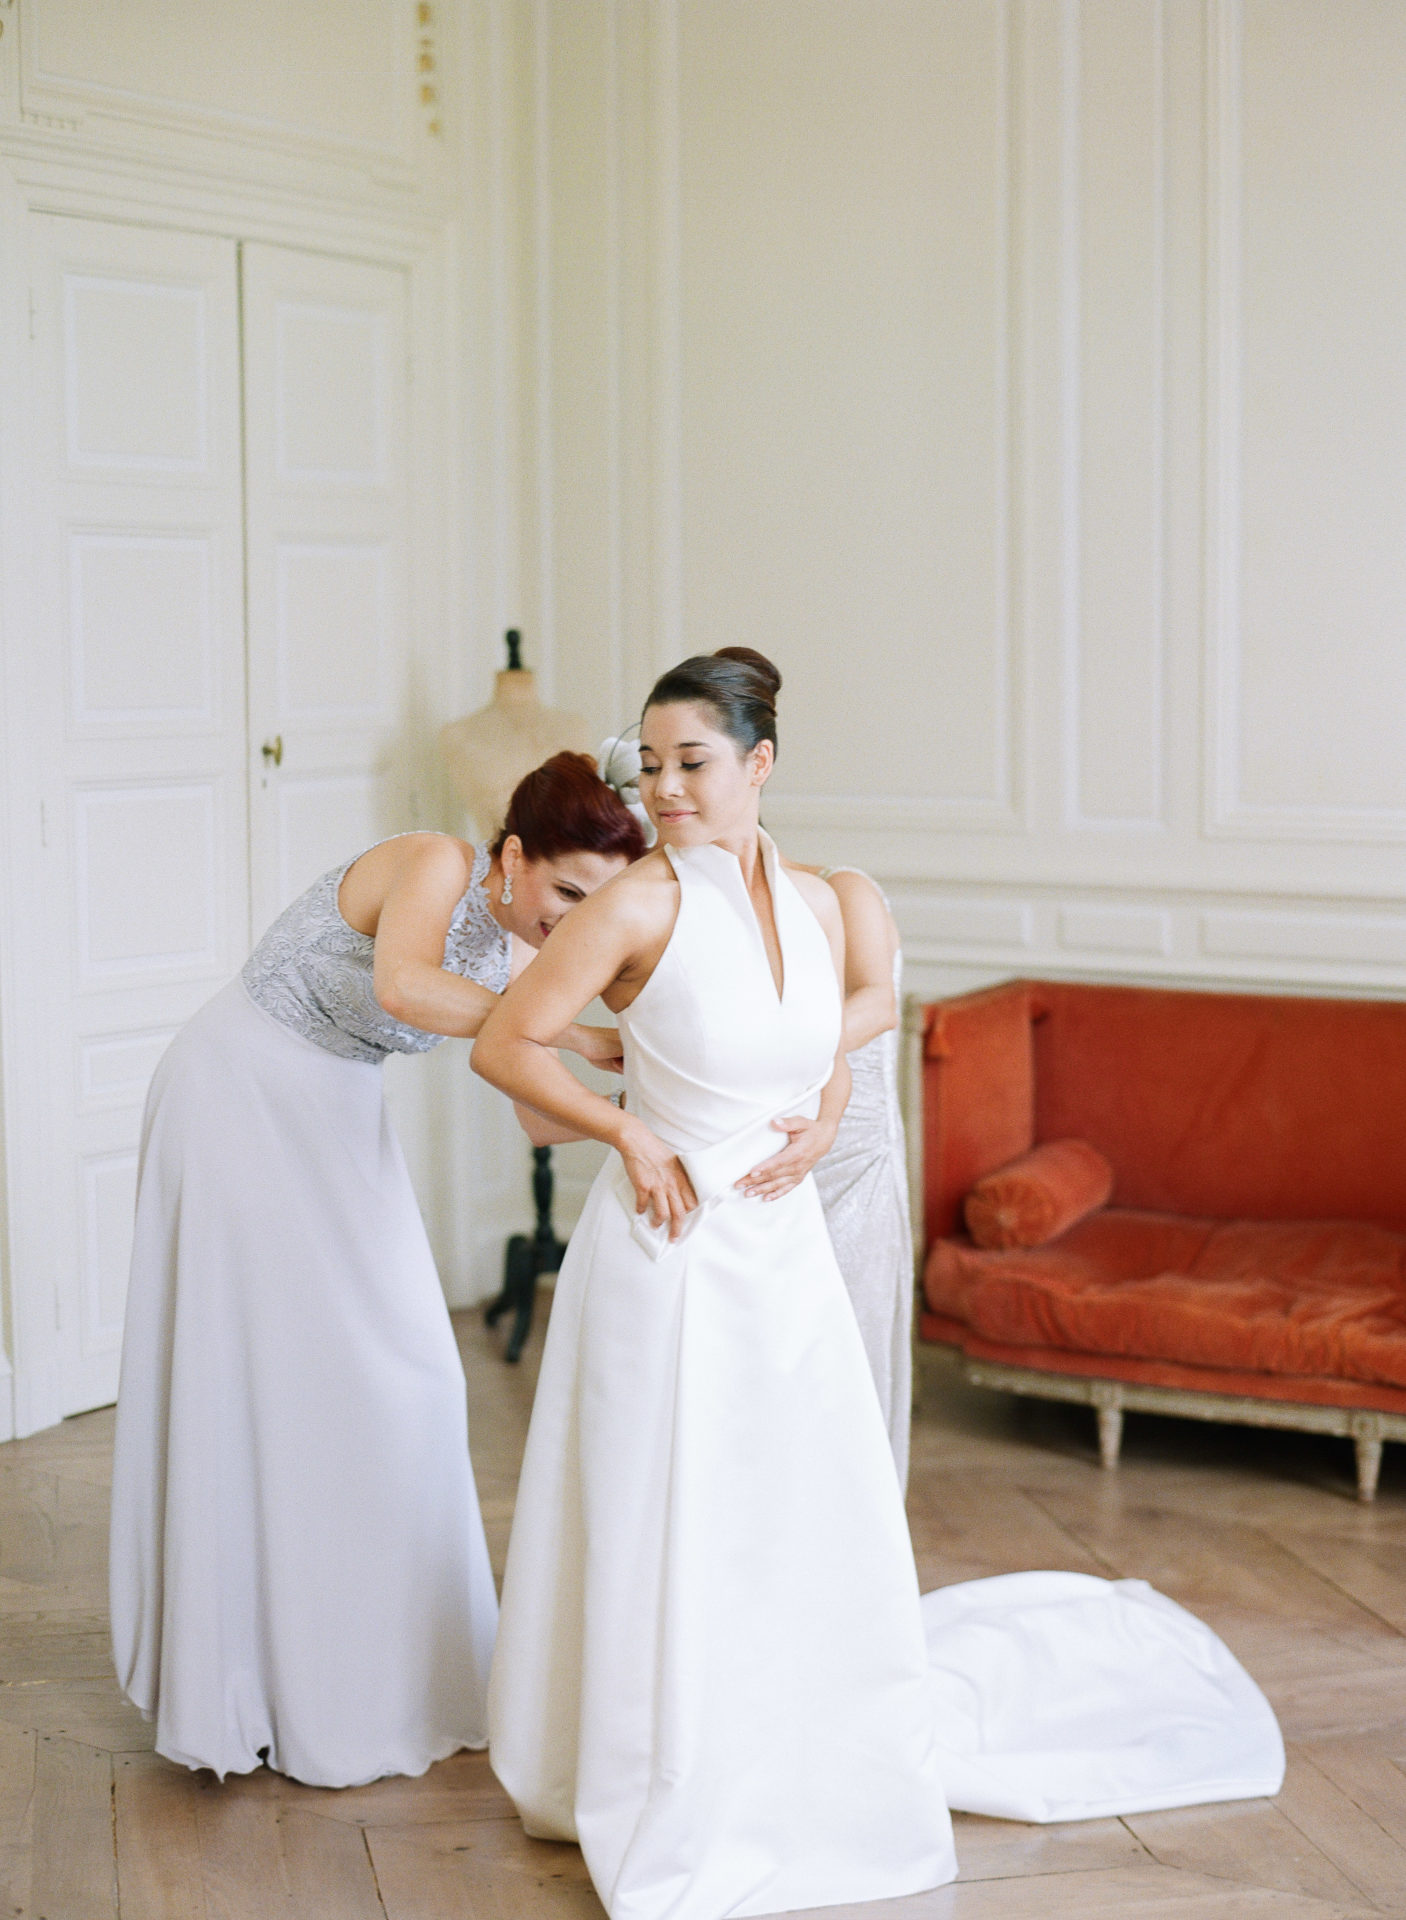 How to get beautiful getting ready wedding images by Wedding Photographer Alexandra Vonk